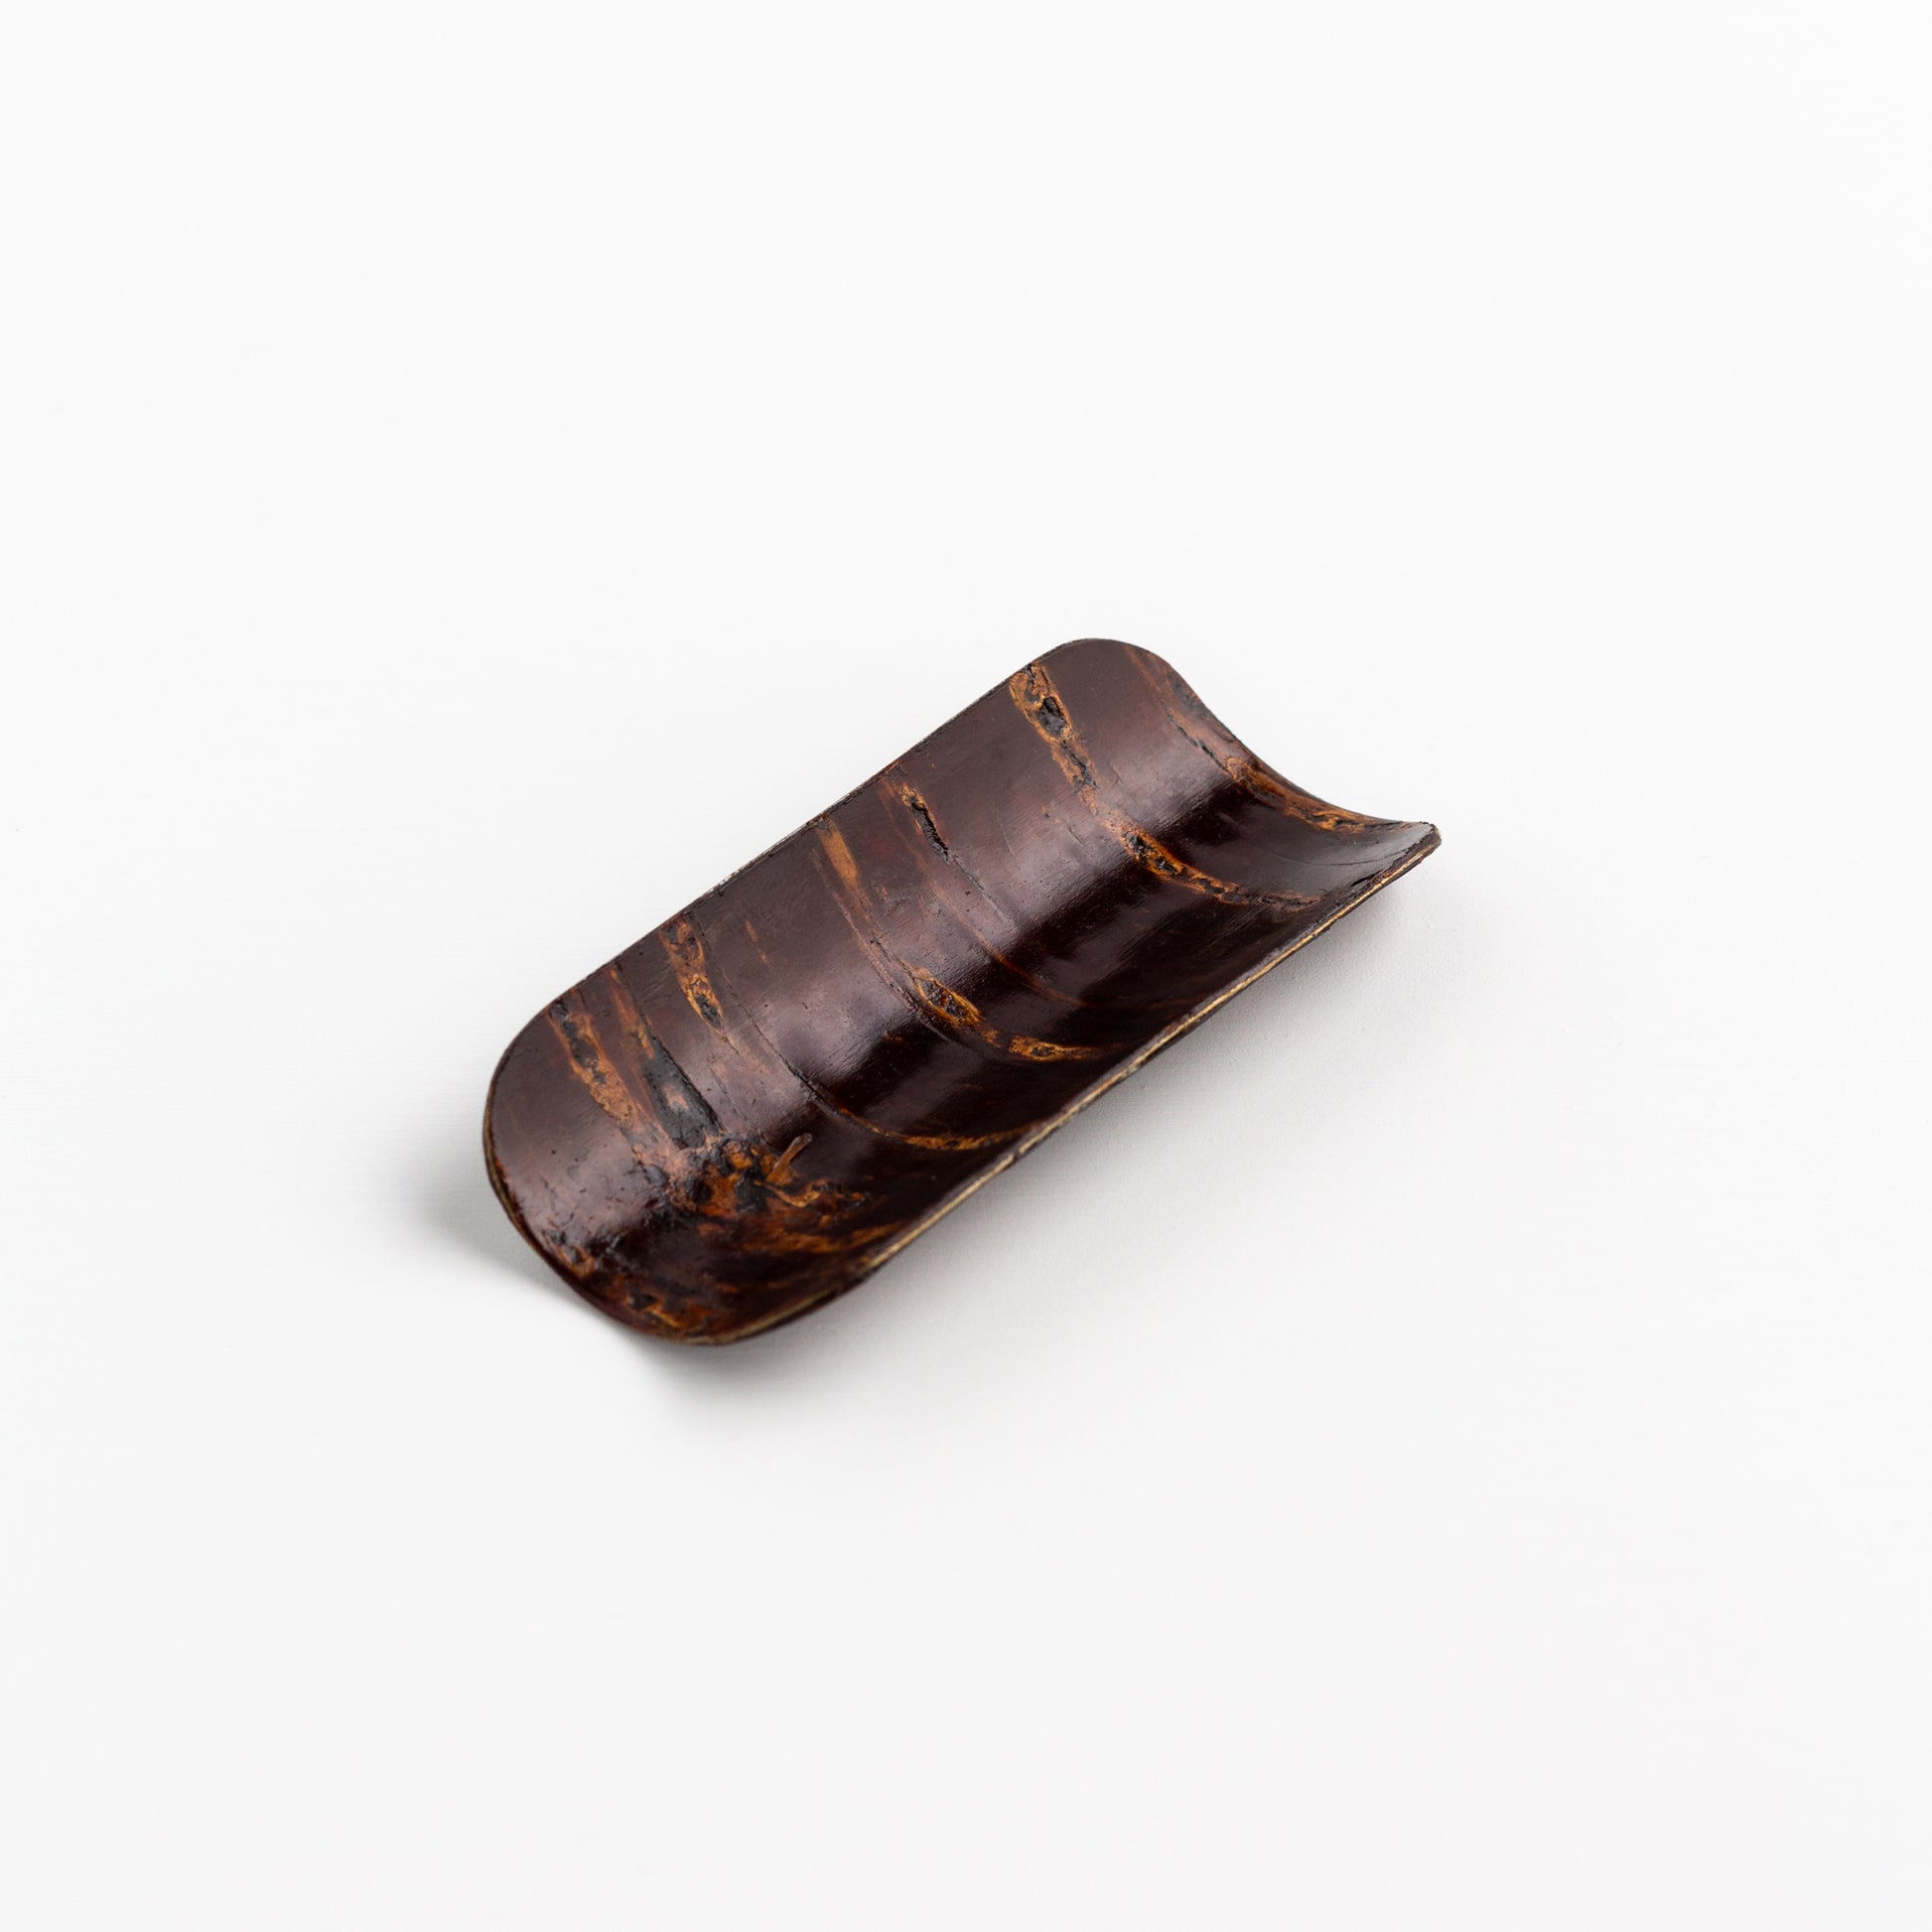 Cherry wood tea scoop. Traditional Japanese style curved wood scoop without a handle.